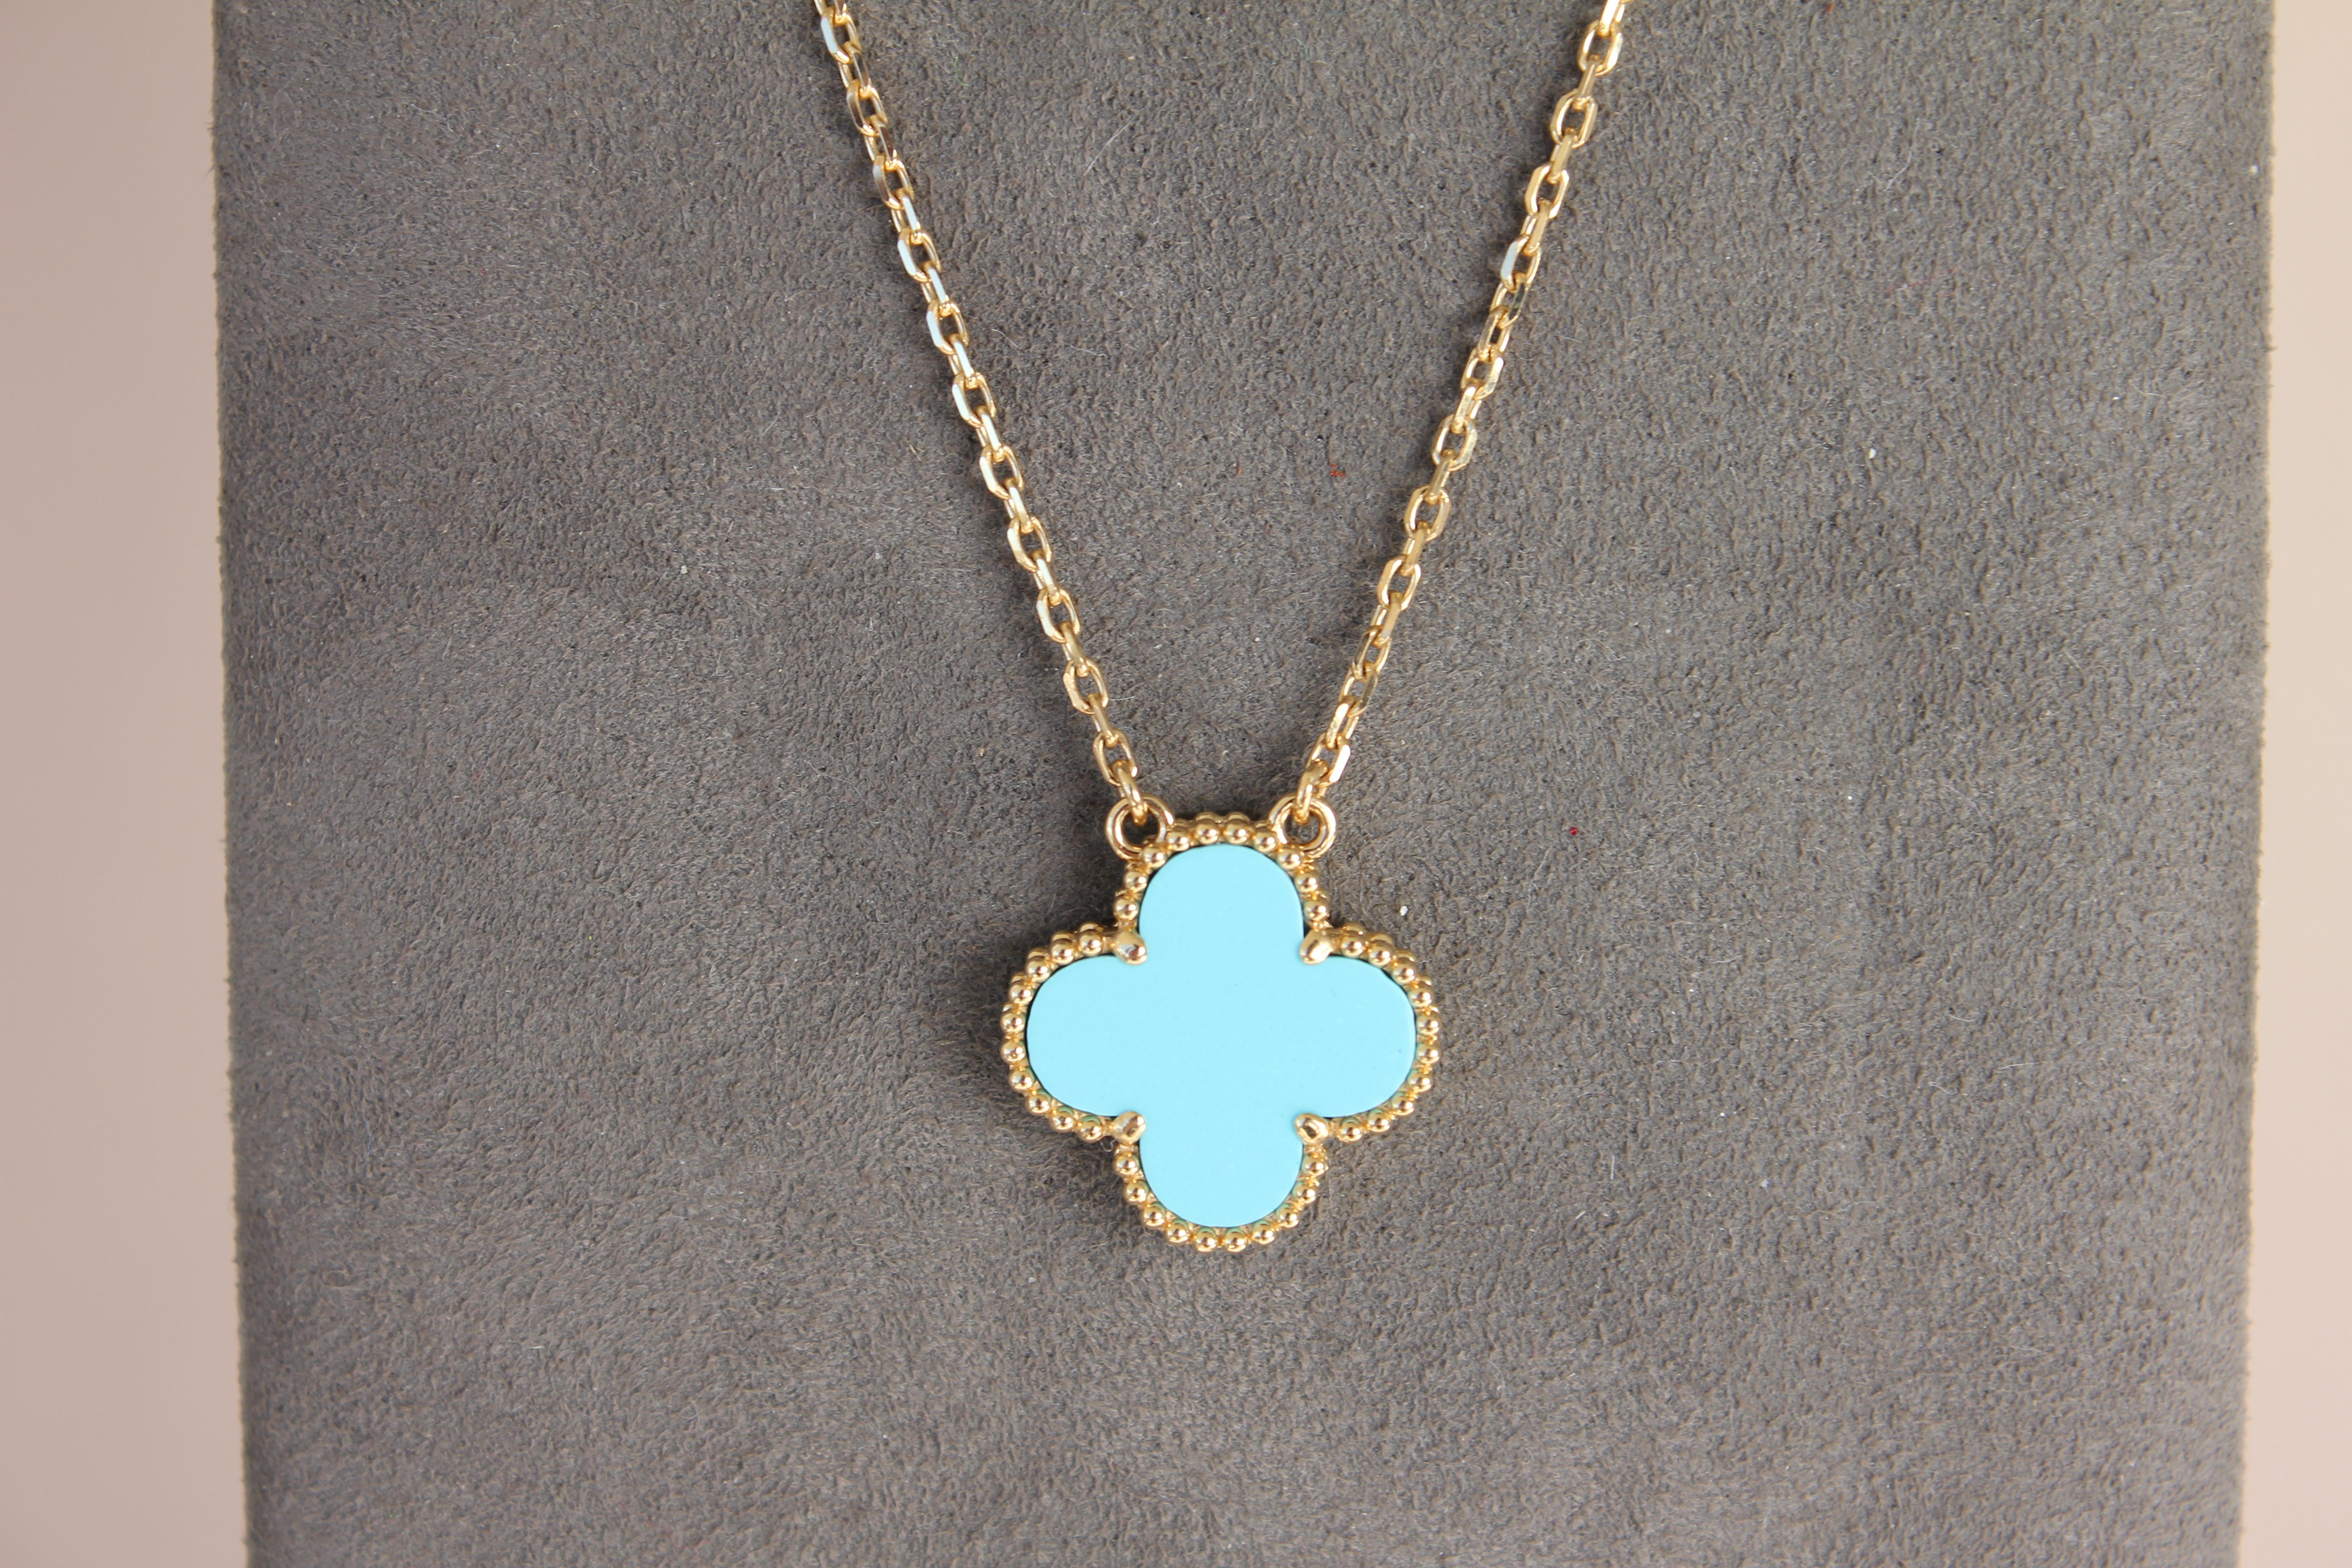 18K Yellow Gold AU 750 
4.59 Grams total weight
Turquoise Motif - Single Stone - Double Sided 
Color of turquoise is very gentle, light teal baby blue. Photos have not been edited, in order to show the true colour of the gemstone.  Very small